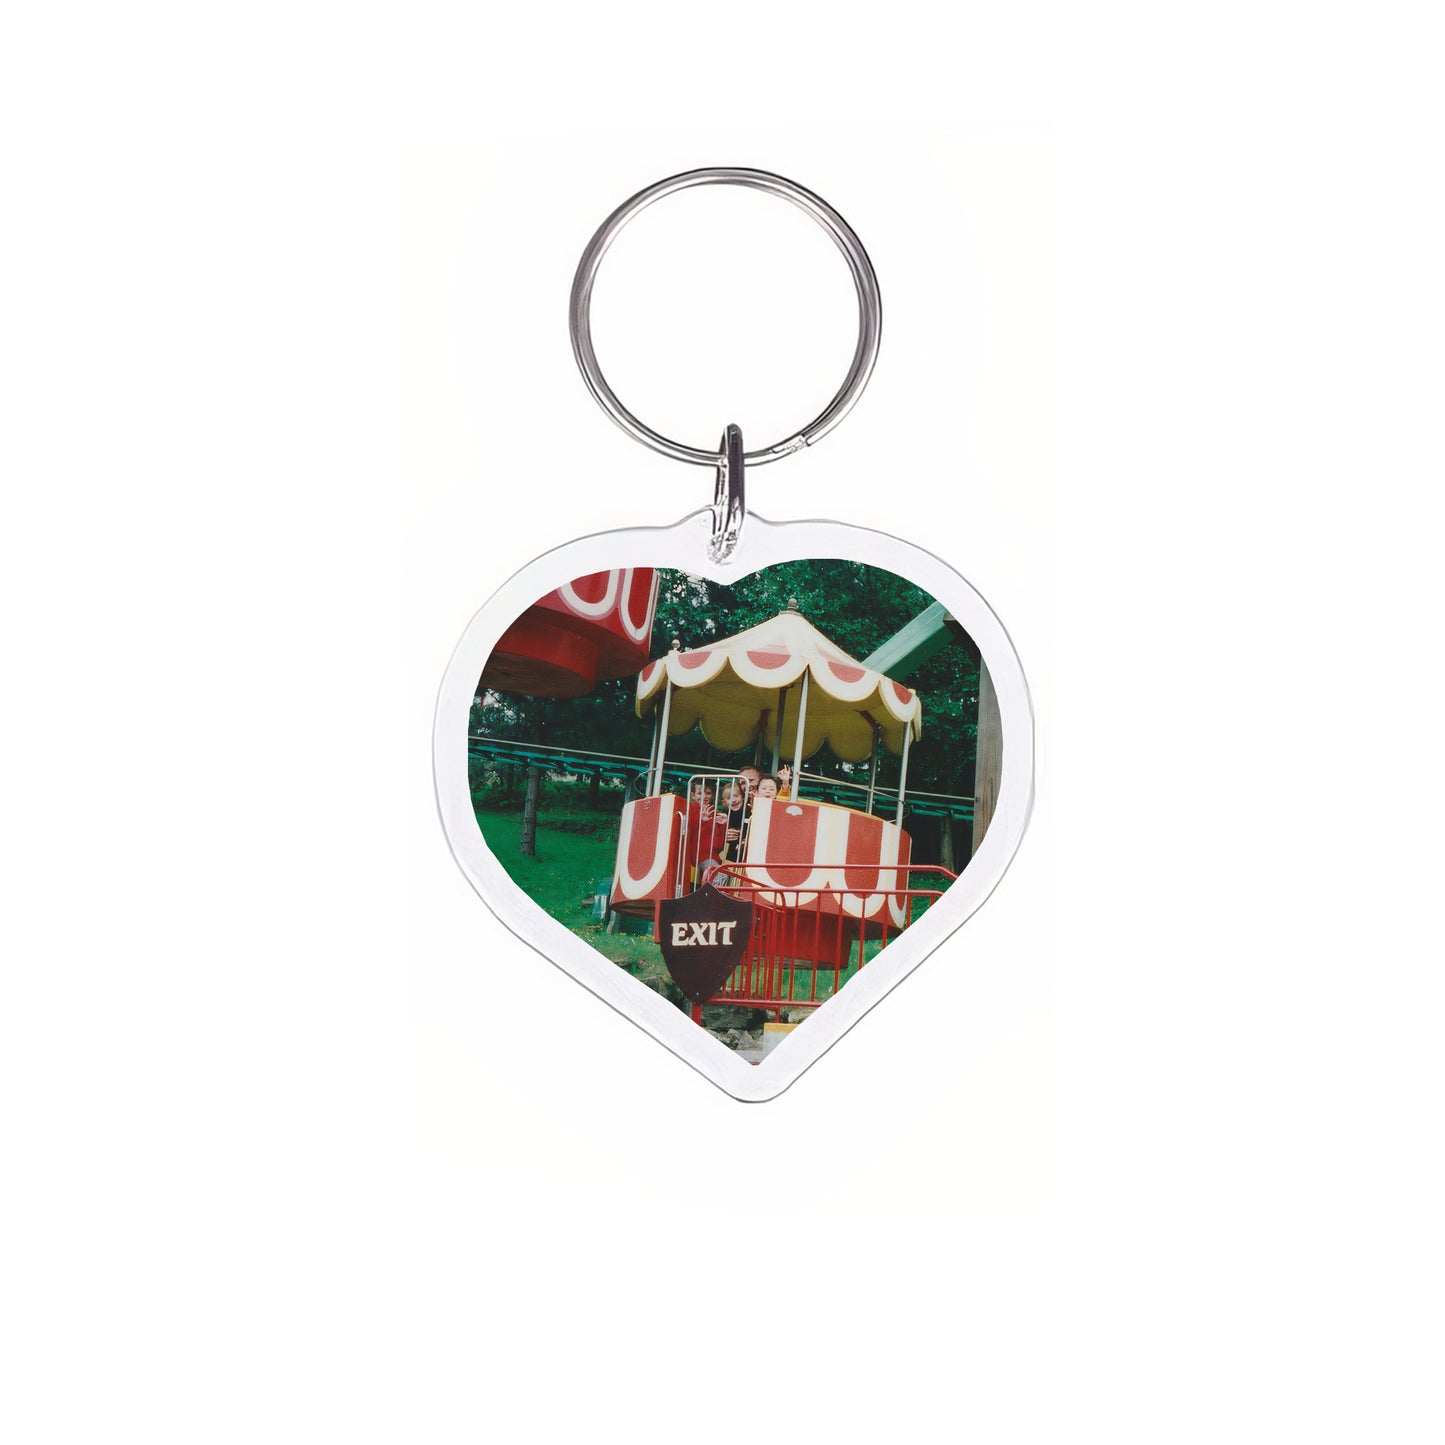 THRILL SEEKERS, HOLD ON KEYRING